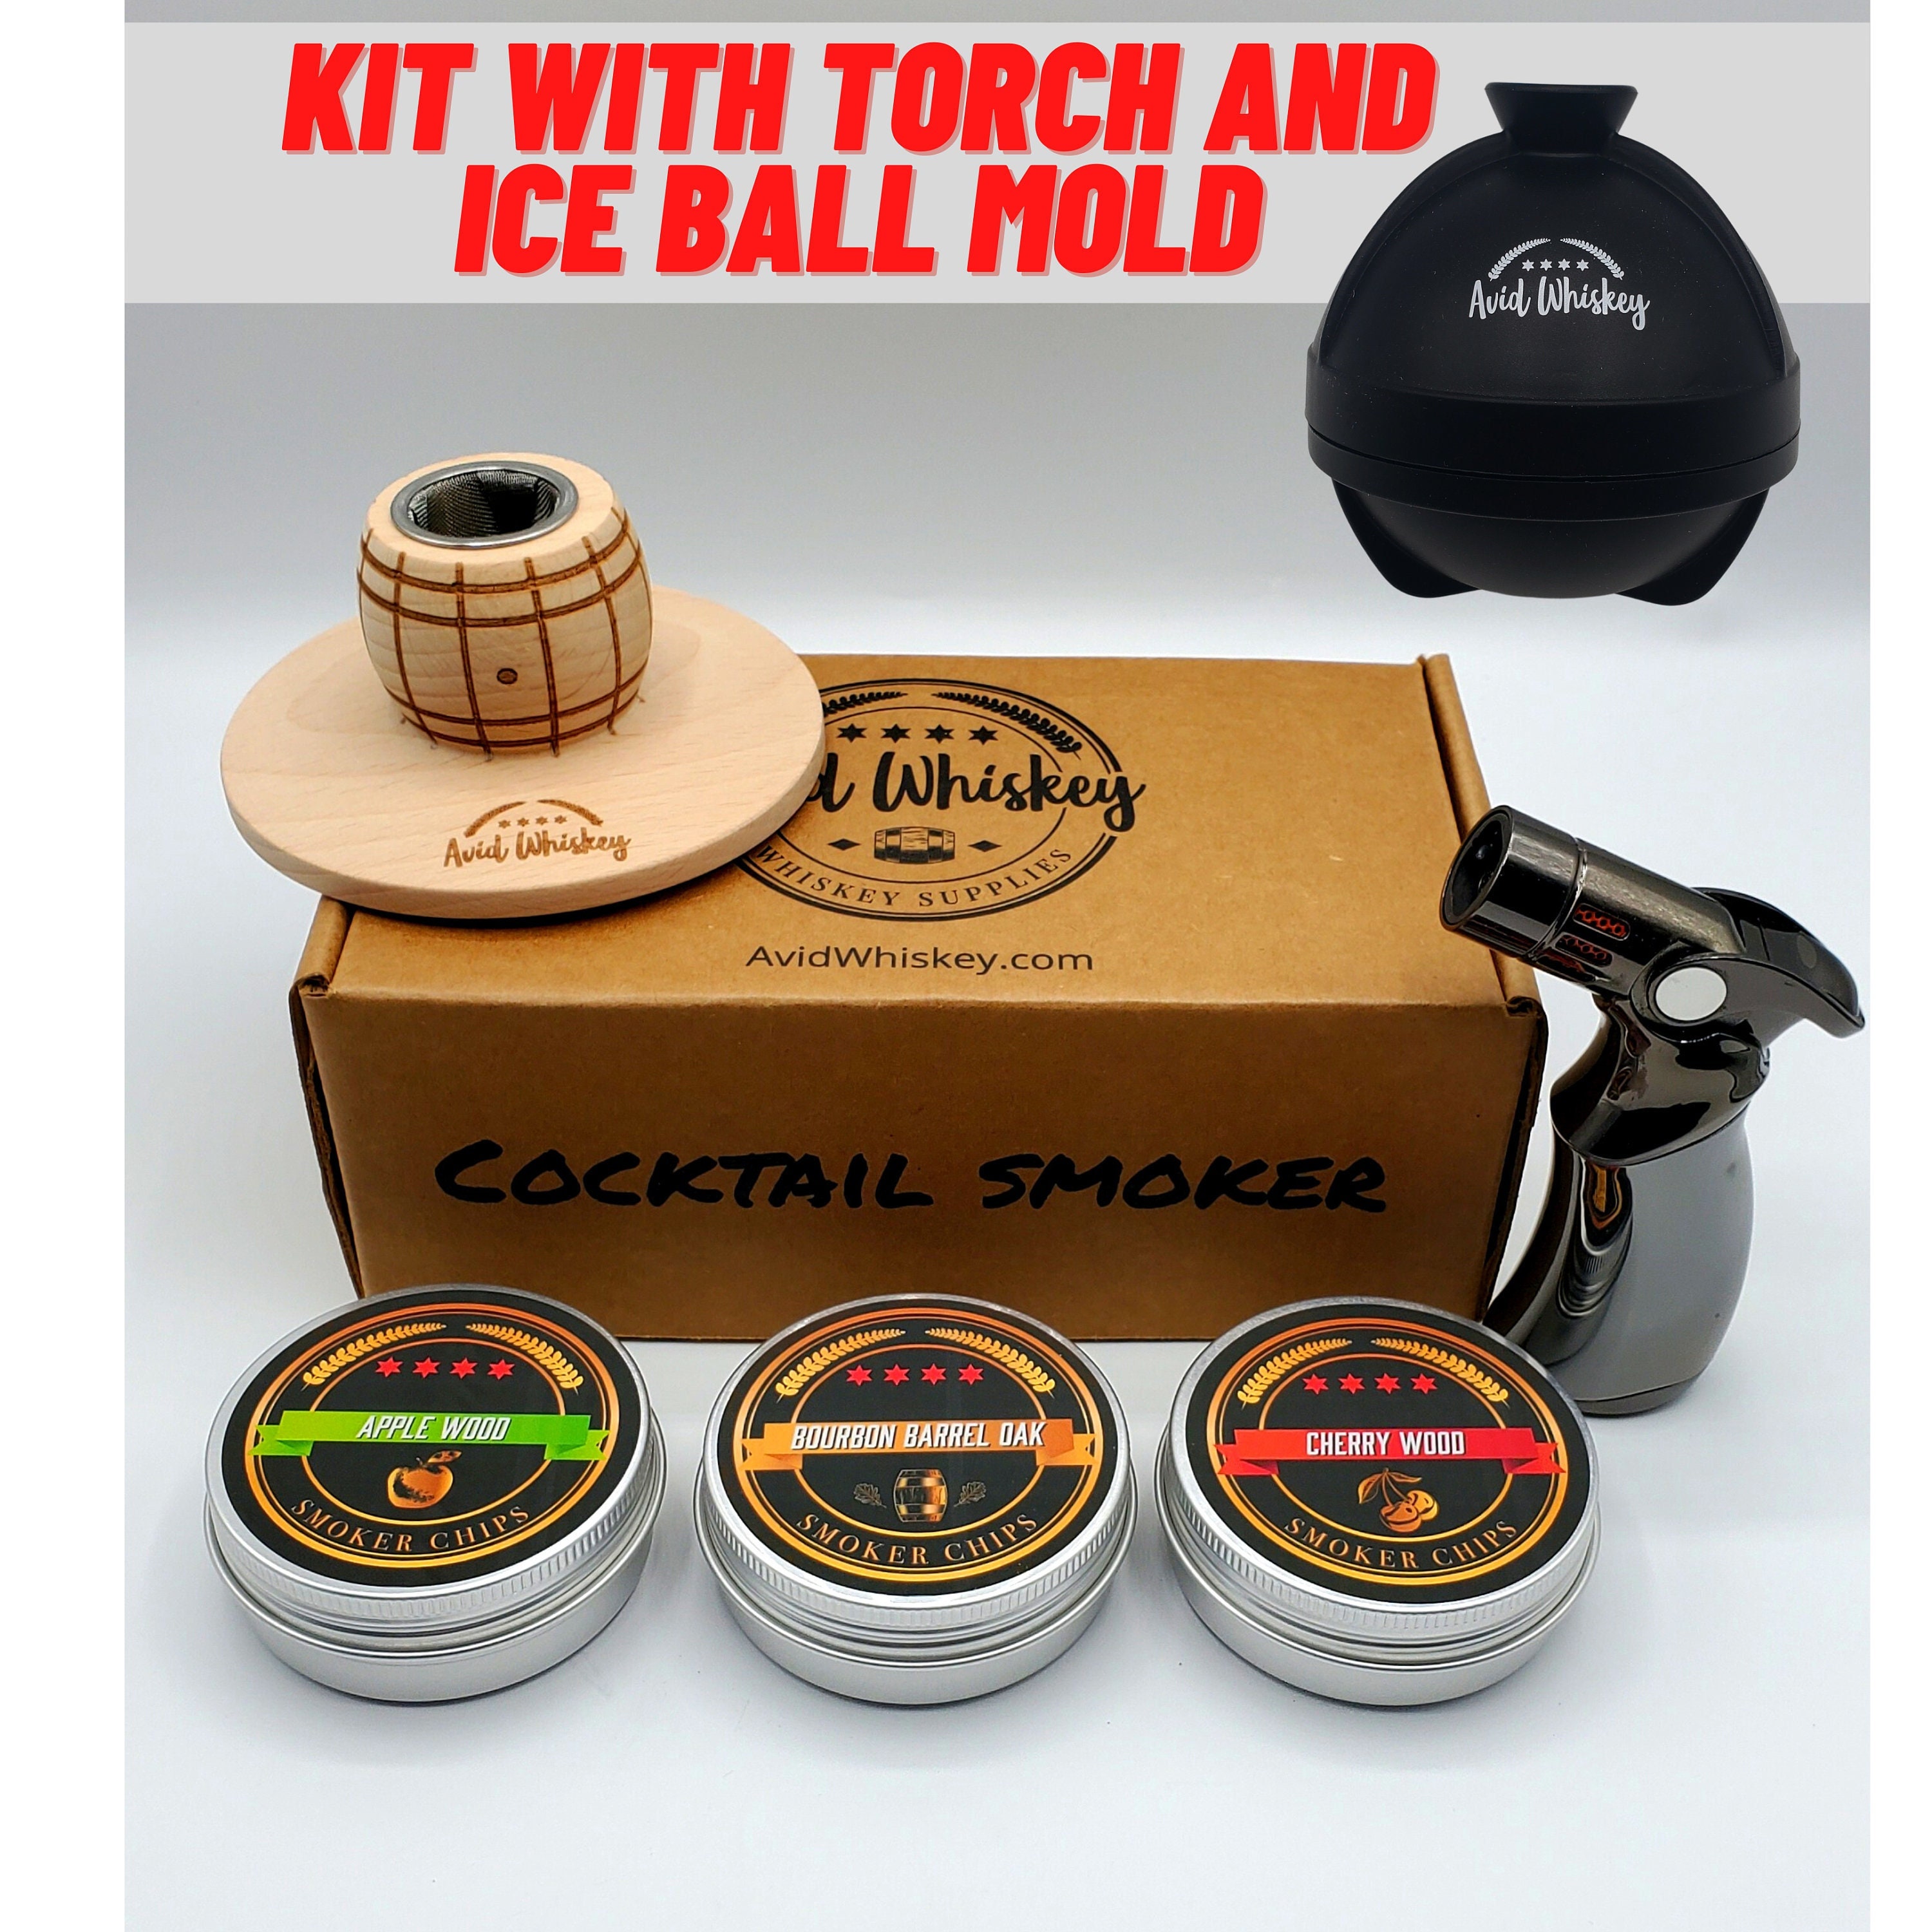 Smoked Cocktail Kit Gift Set with Smoking Chips & Torch